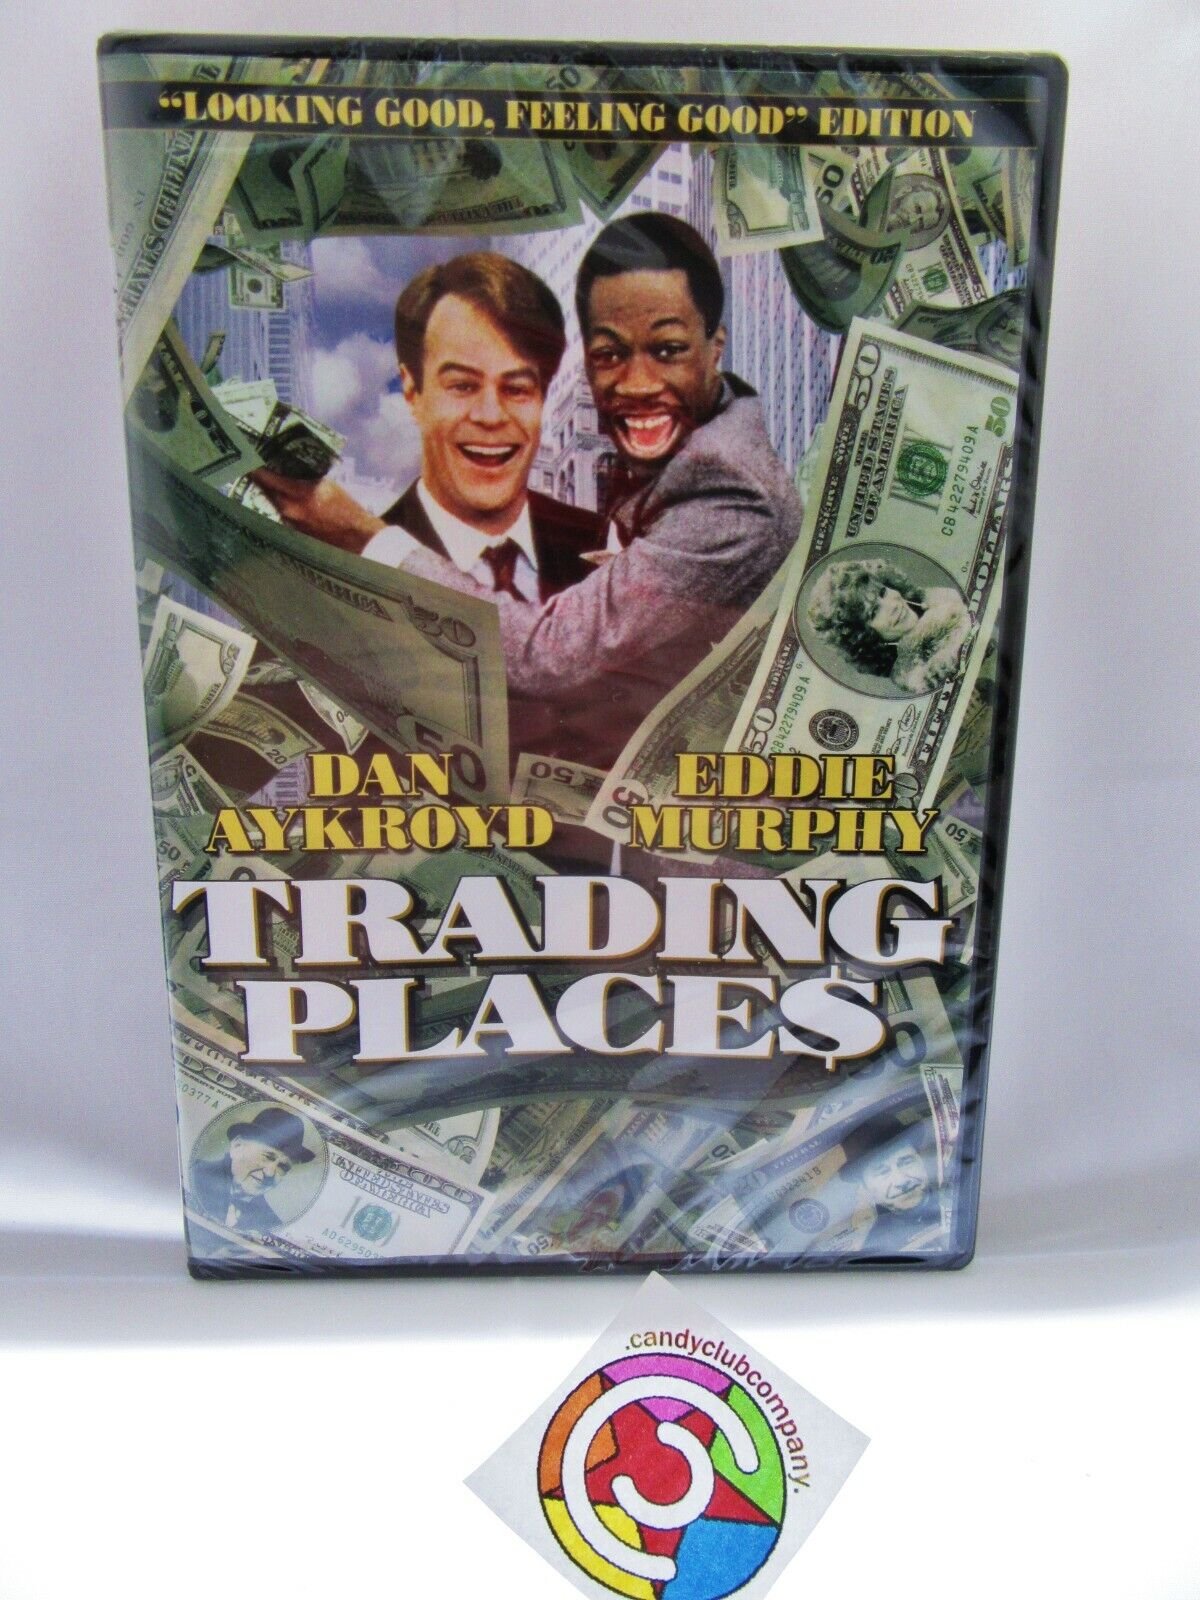 Trading Places (DVD), Paramount, Comedy - image 4 of 4